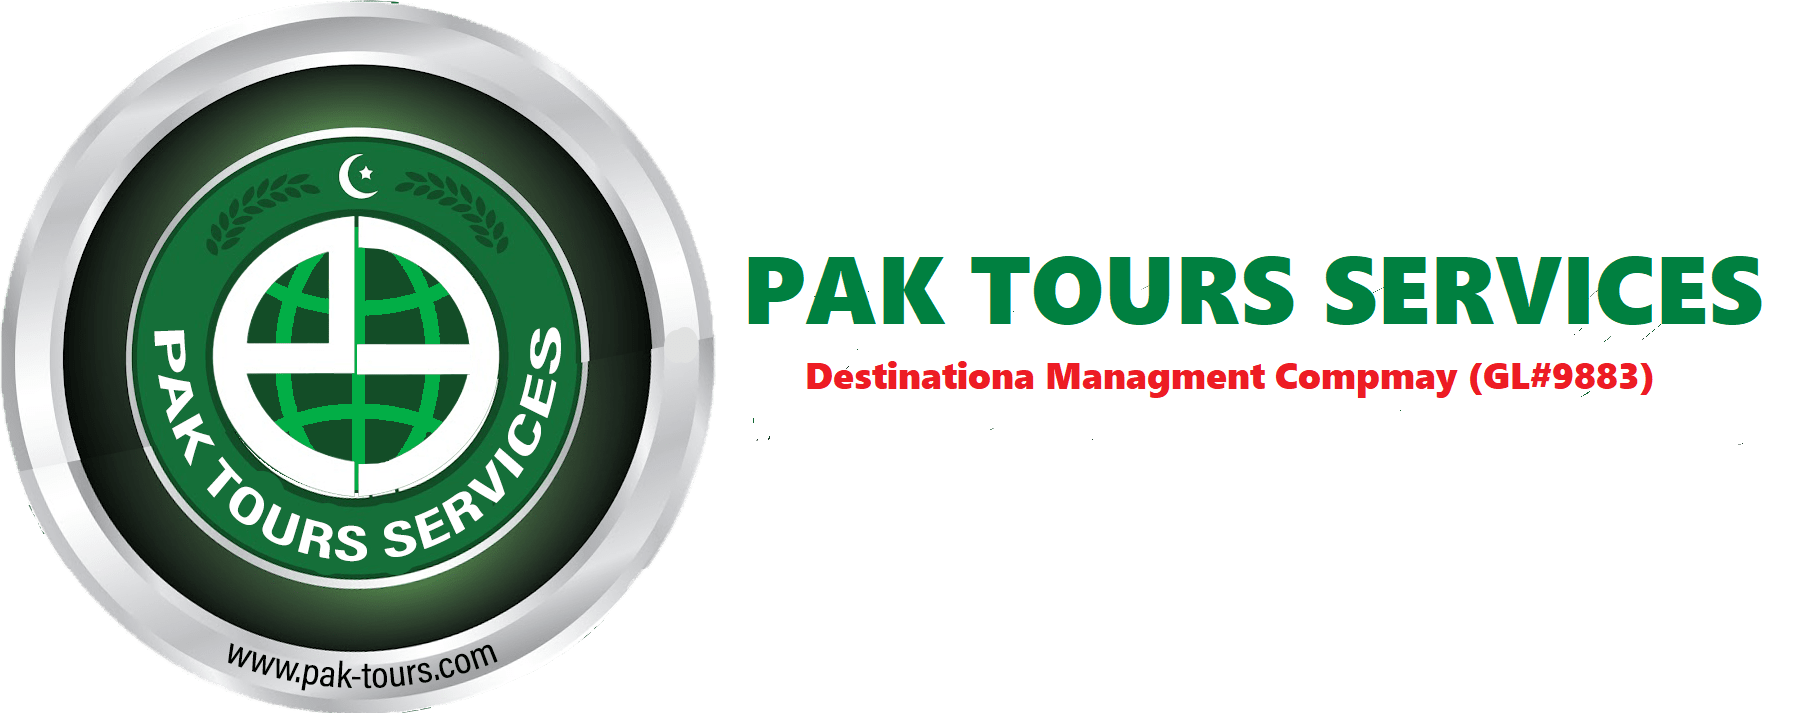 Your Trusted Travel Partner | Green Park Hotel Shogran - Your Trusted Travel Partner